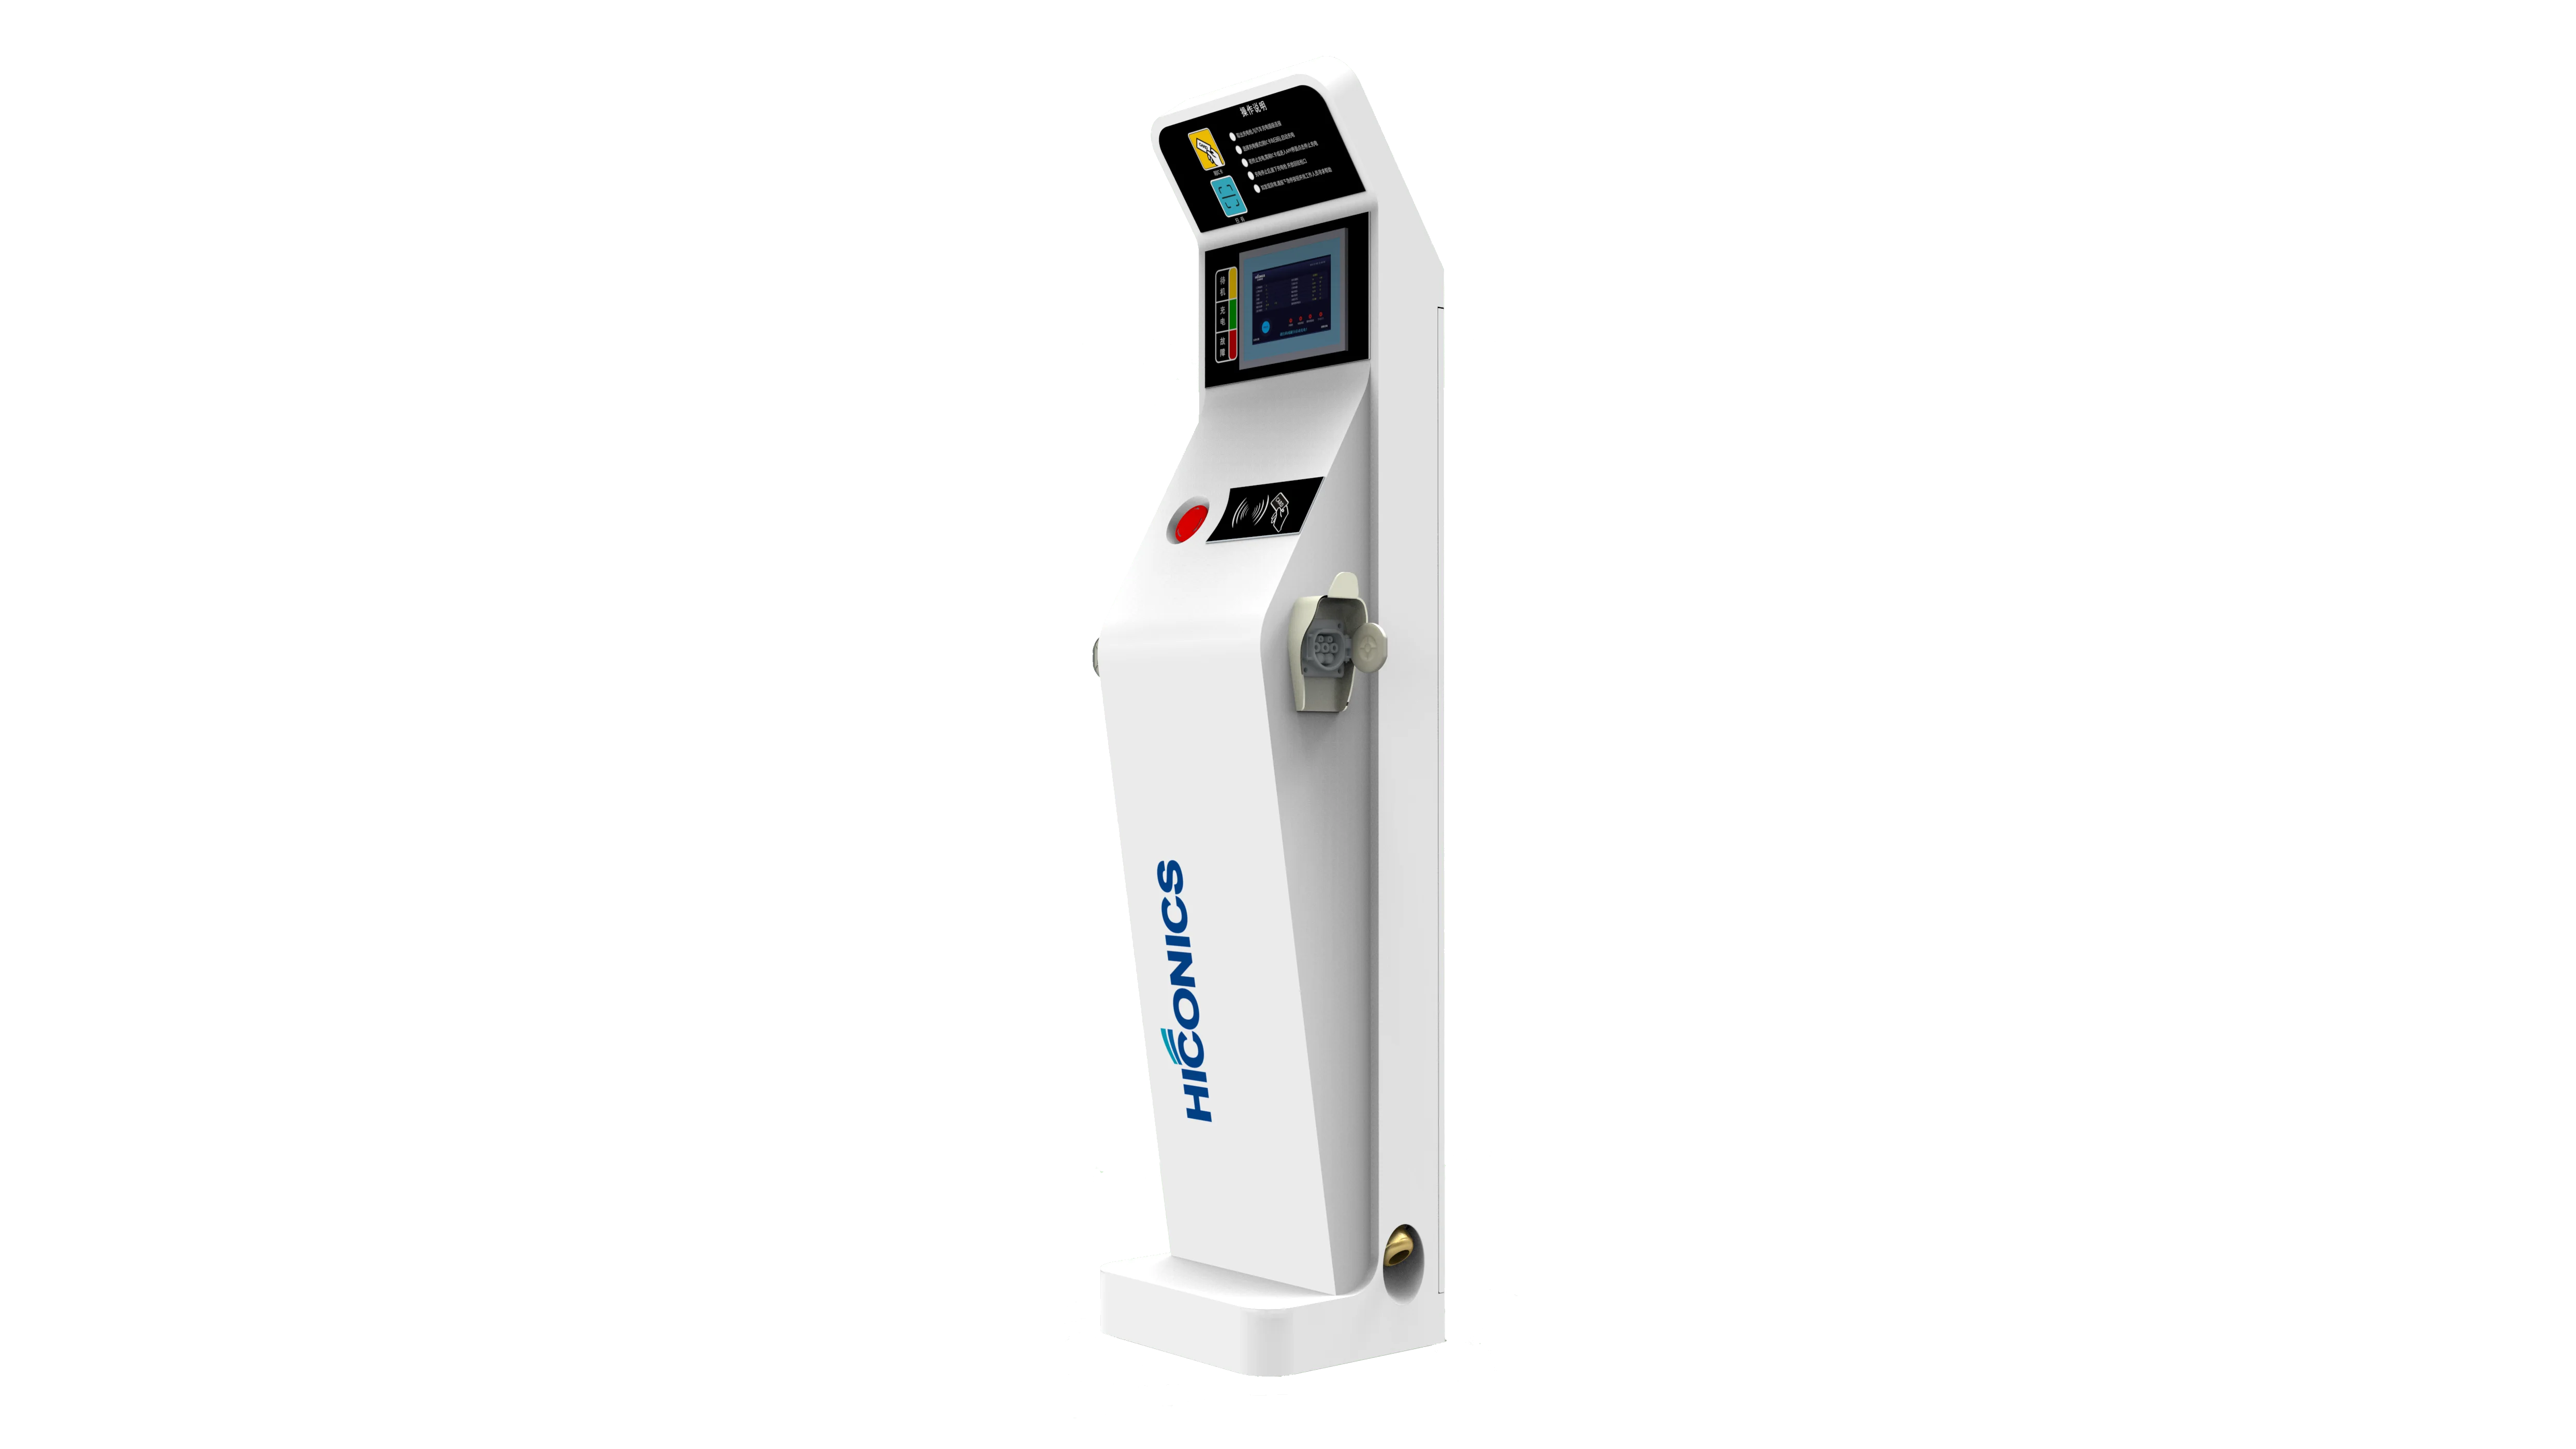 Hiconics 22kW 32A level 2 Smart EV Charger Station with OCPP RFID and 4G LTE for EV Charging Station